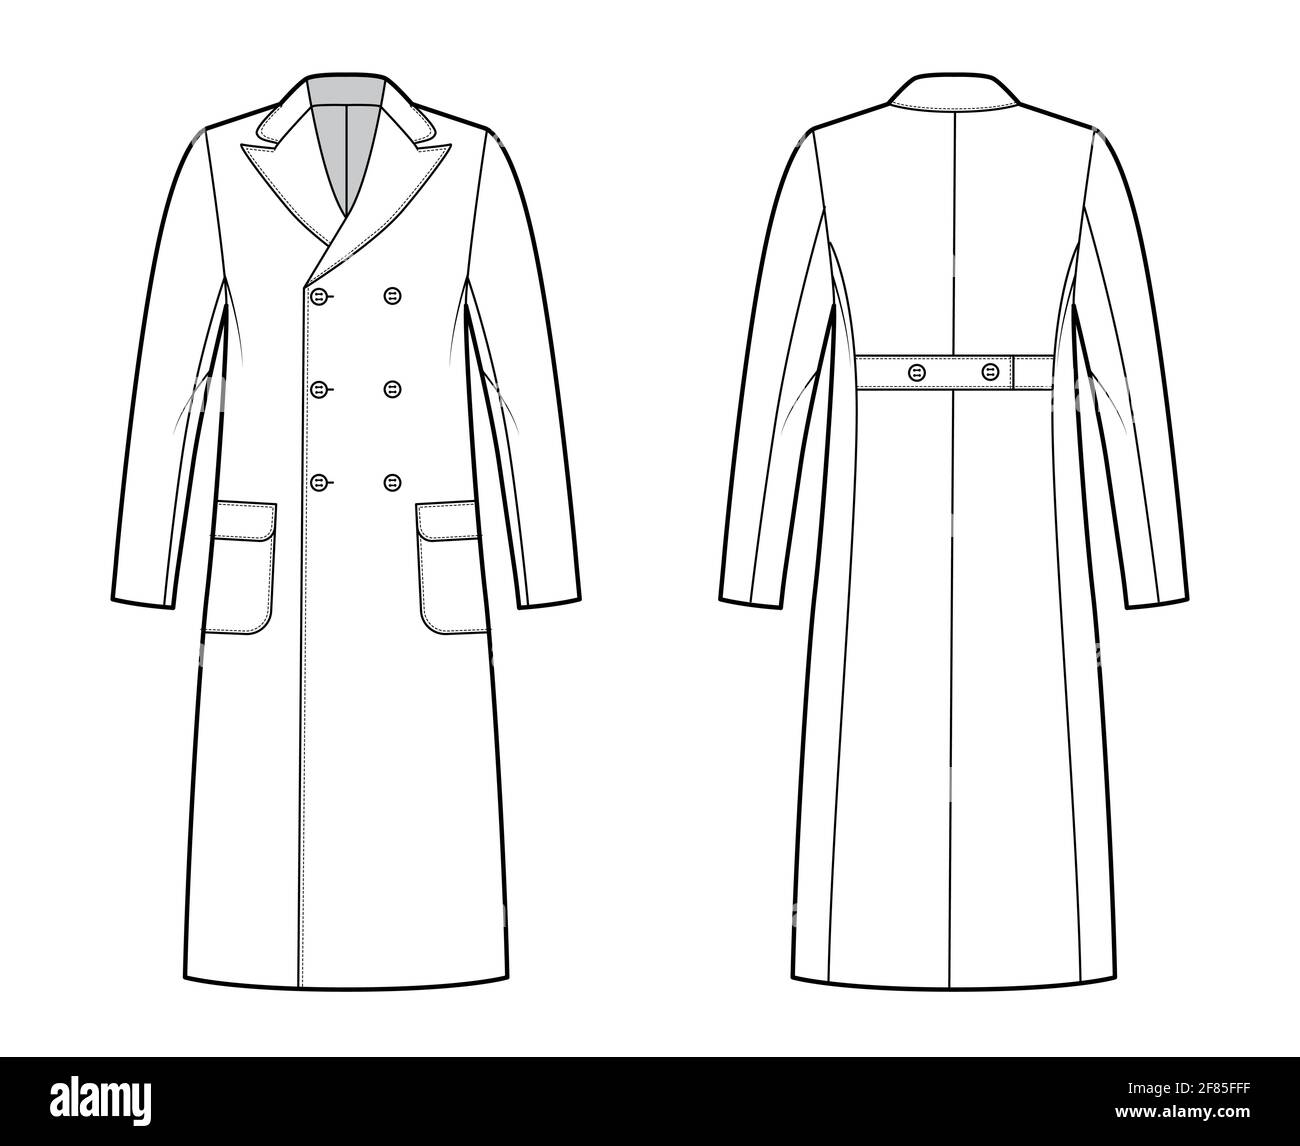 Polo coat technical fashion illustration with double breasted, midi length,  round peak collar, flap patch pockets.